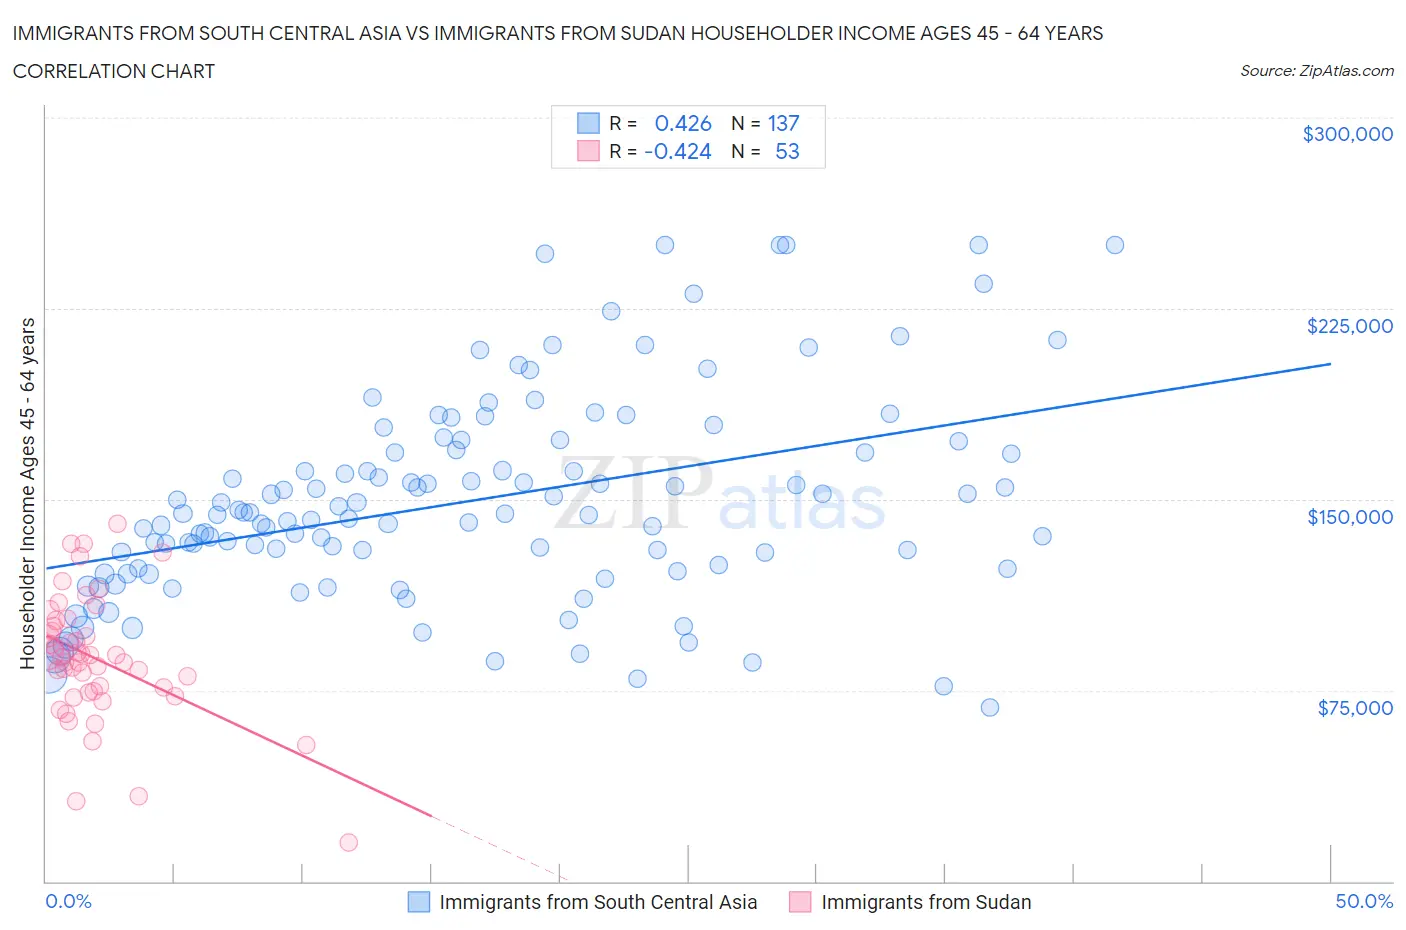 Immigrants from South Central Asia vs Immigrants from Sudan Householder Income Ages 45 - 64 years